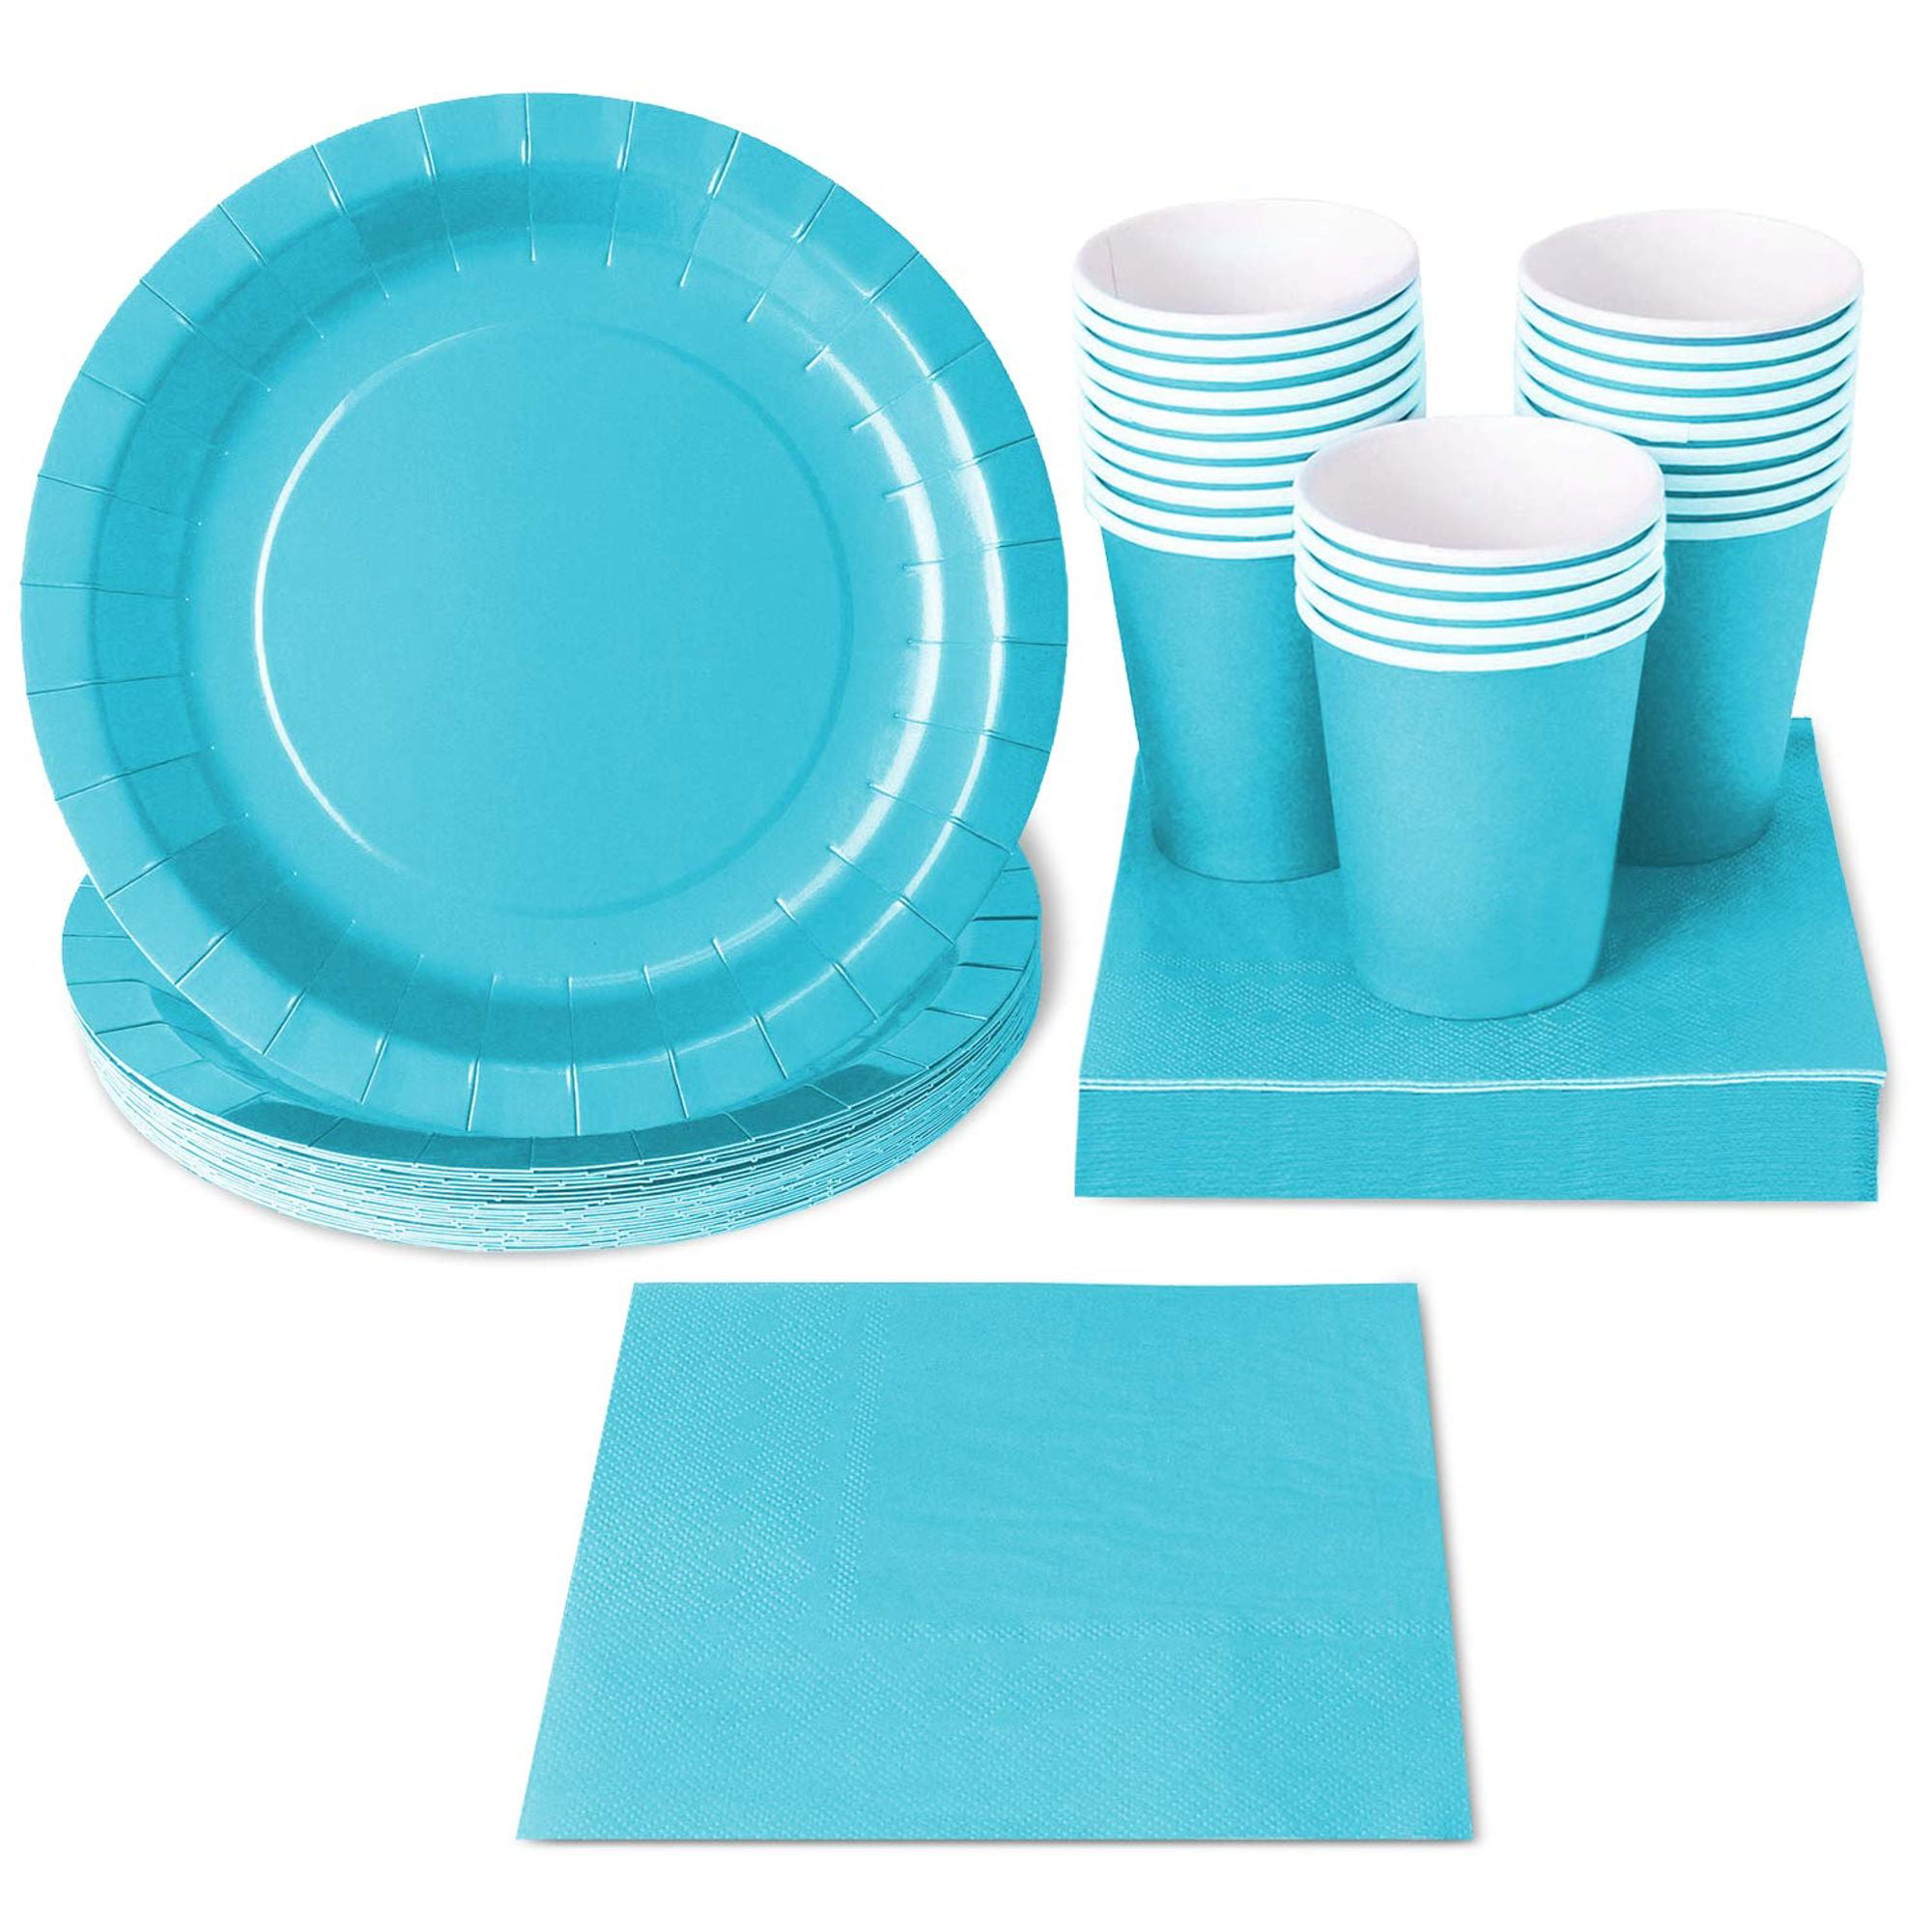 bulk plates and cups